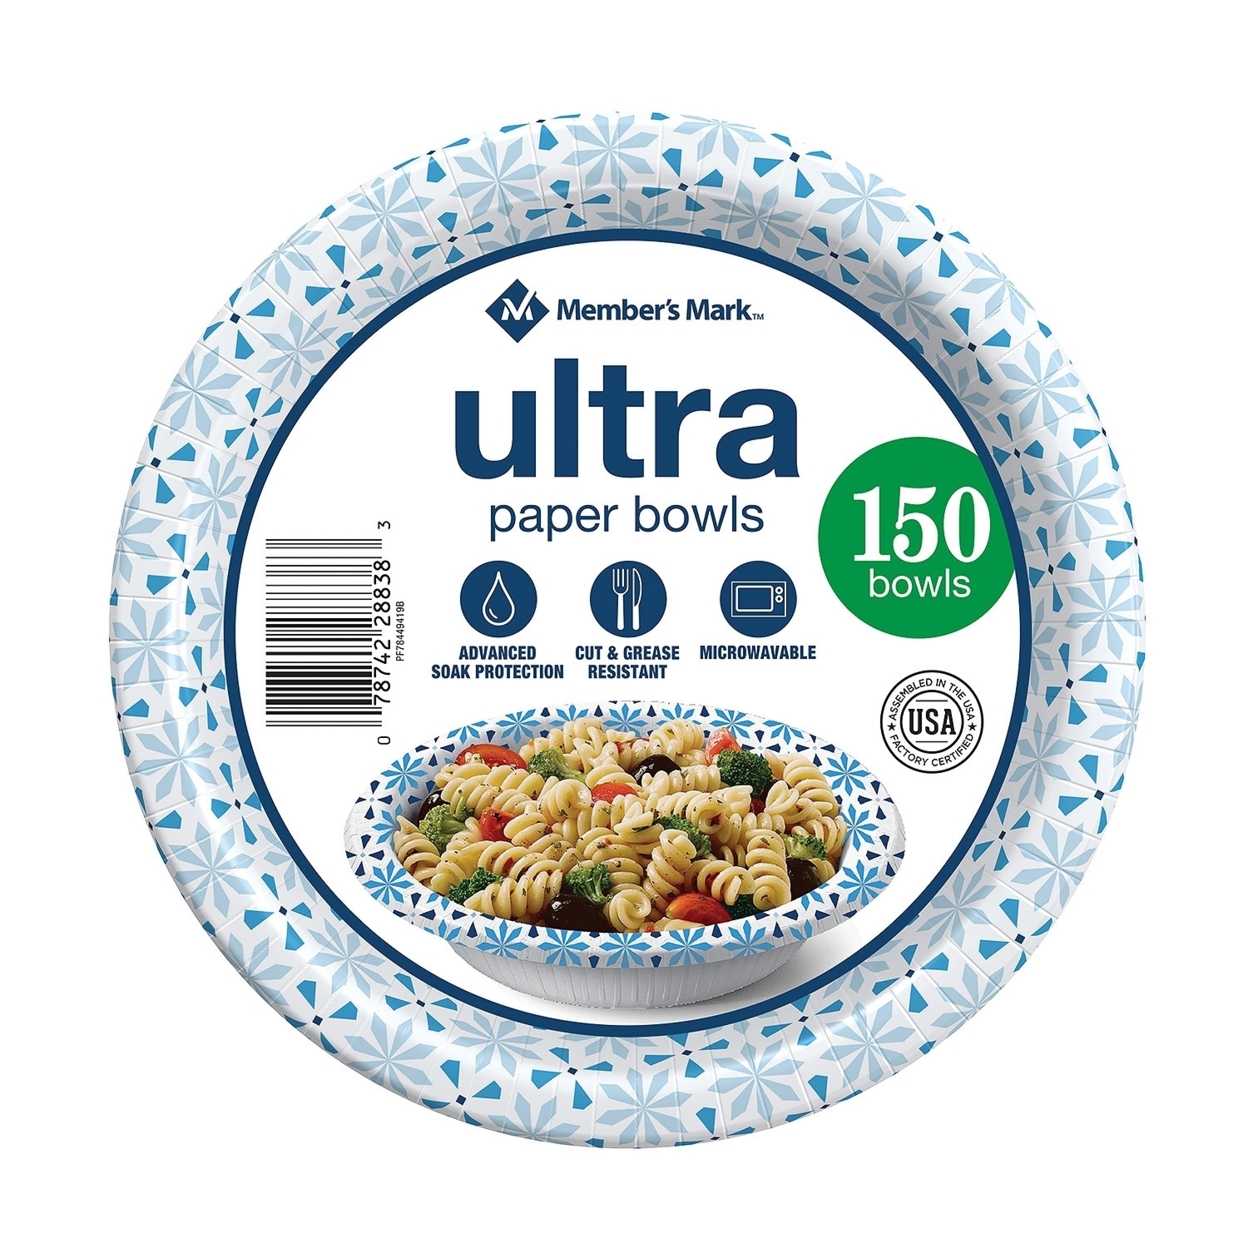 Member's Mark Ultra Paper Bowls (20 Ounce,150 Count)